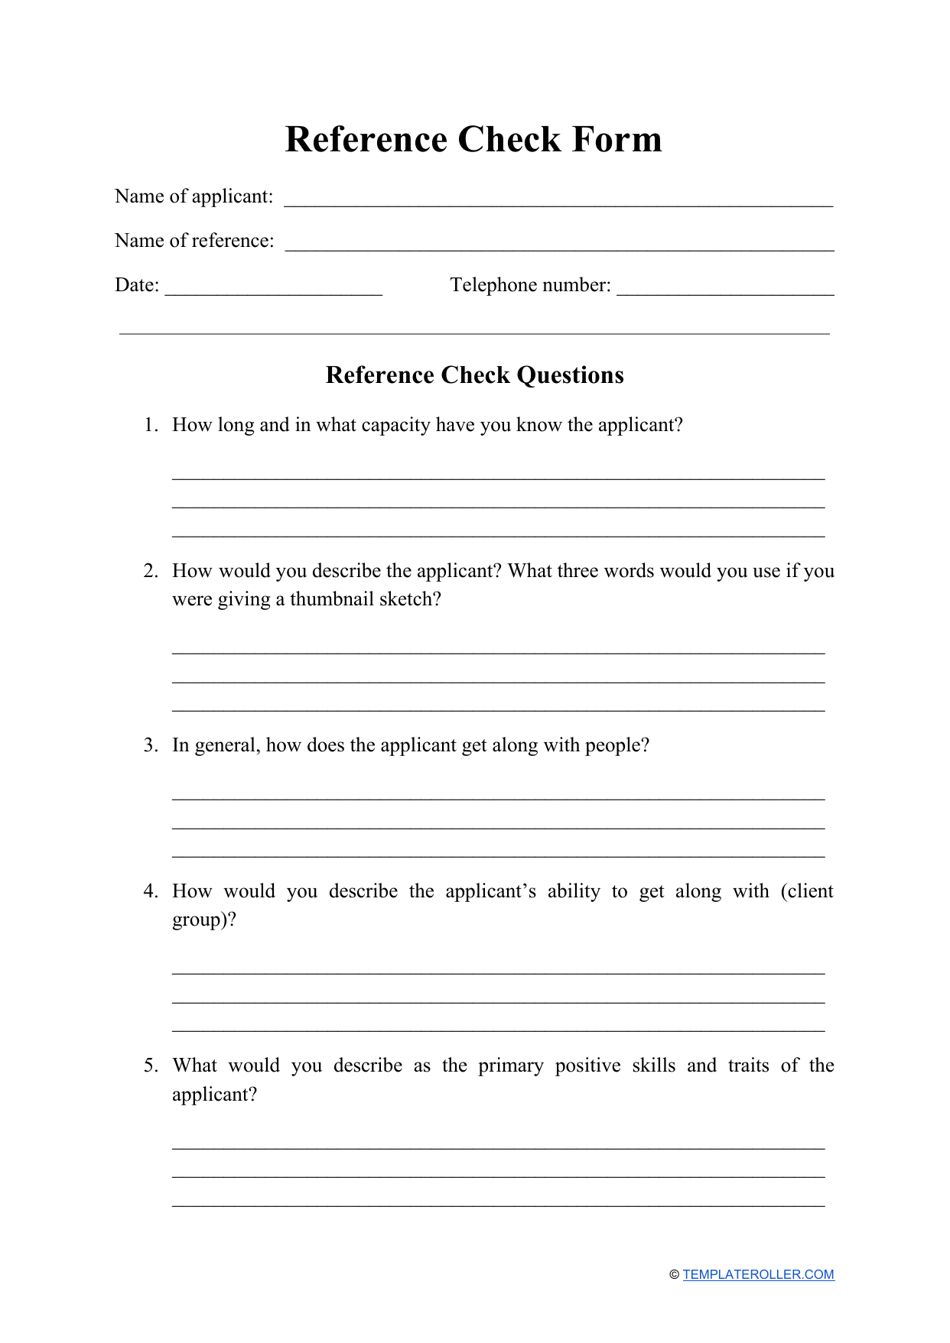 free-printable-reference-check-form-printable-form-templates-and-letter